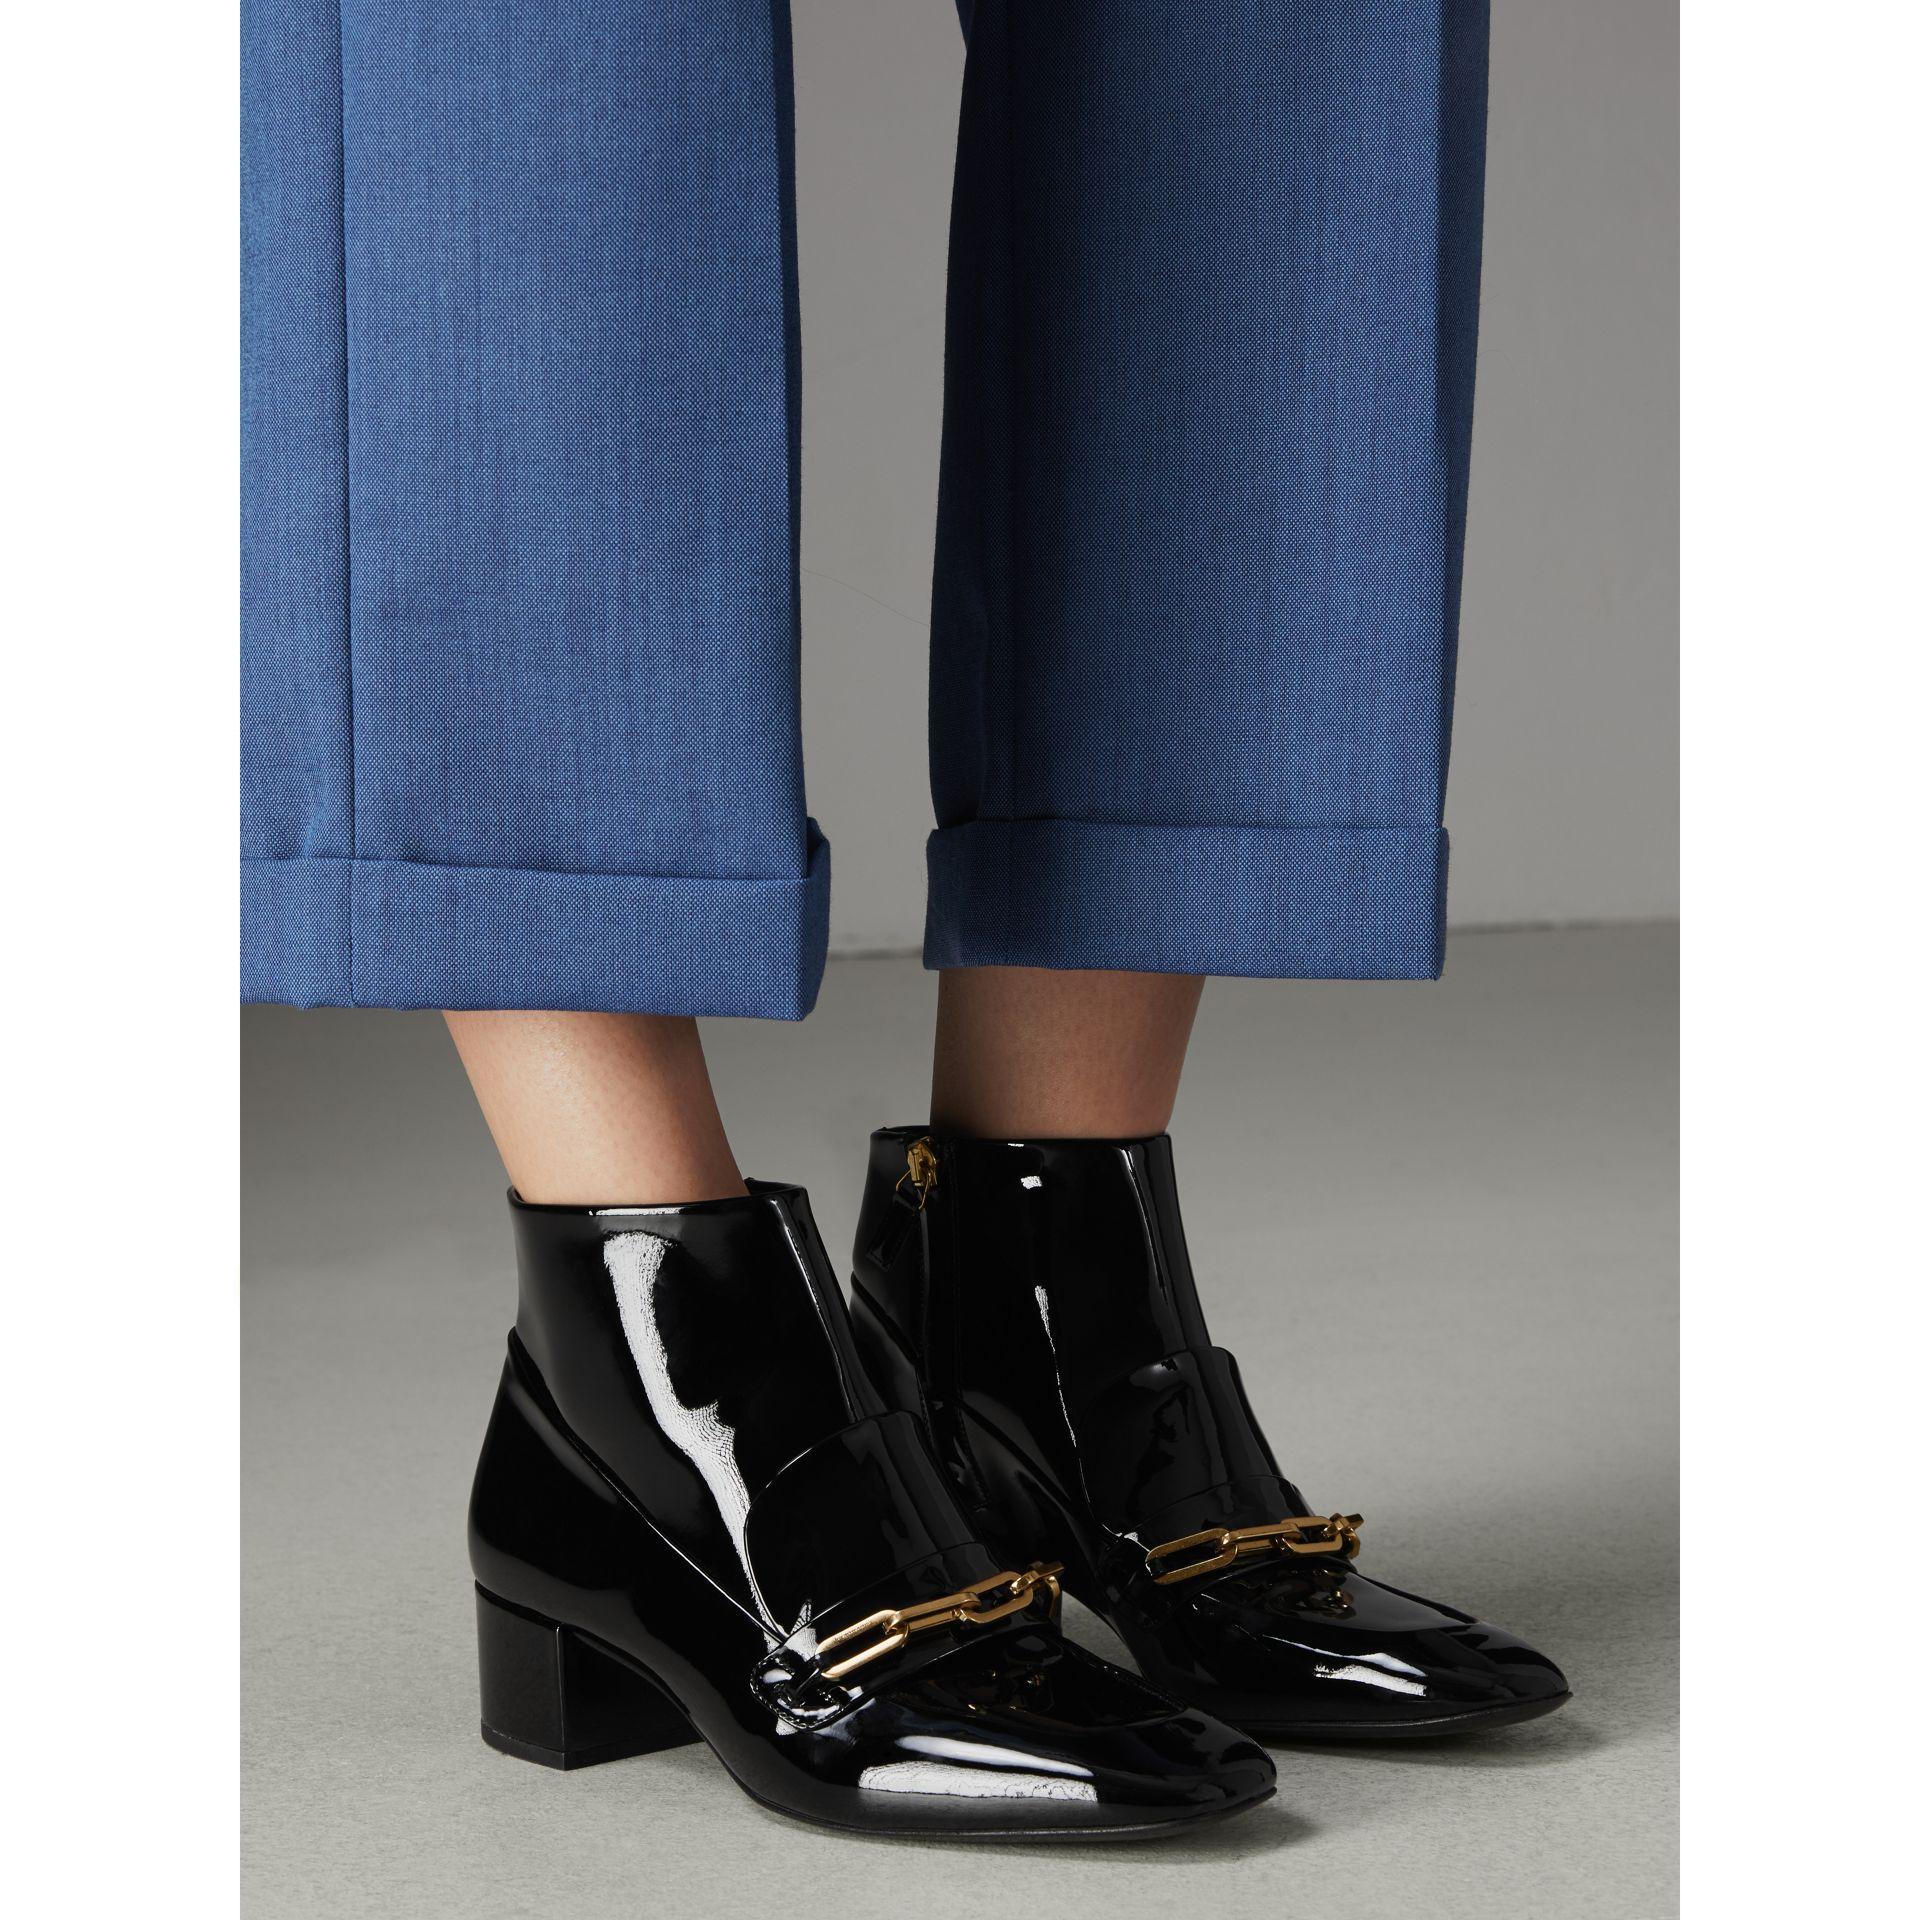 burberry link detail patent leather ankle boots